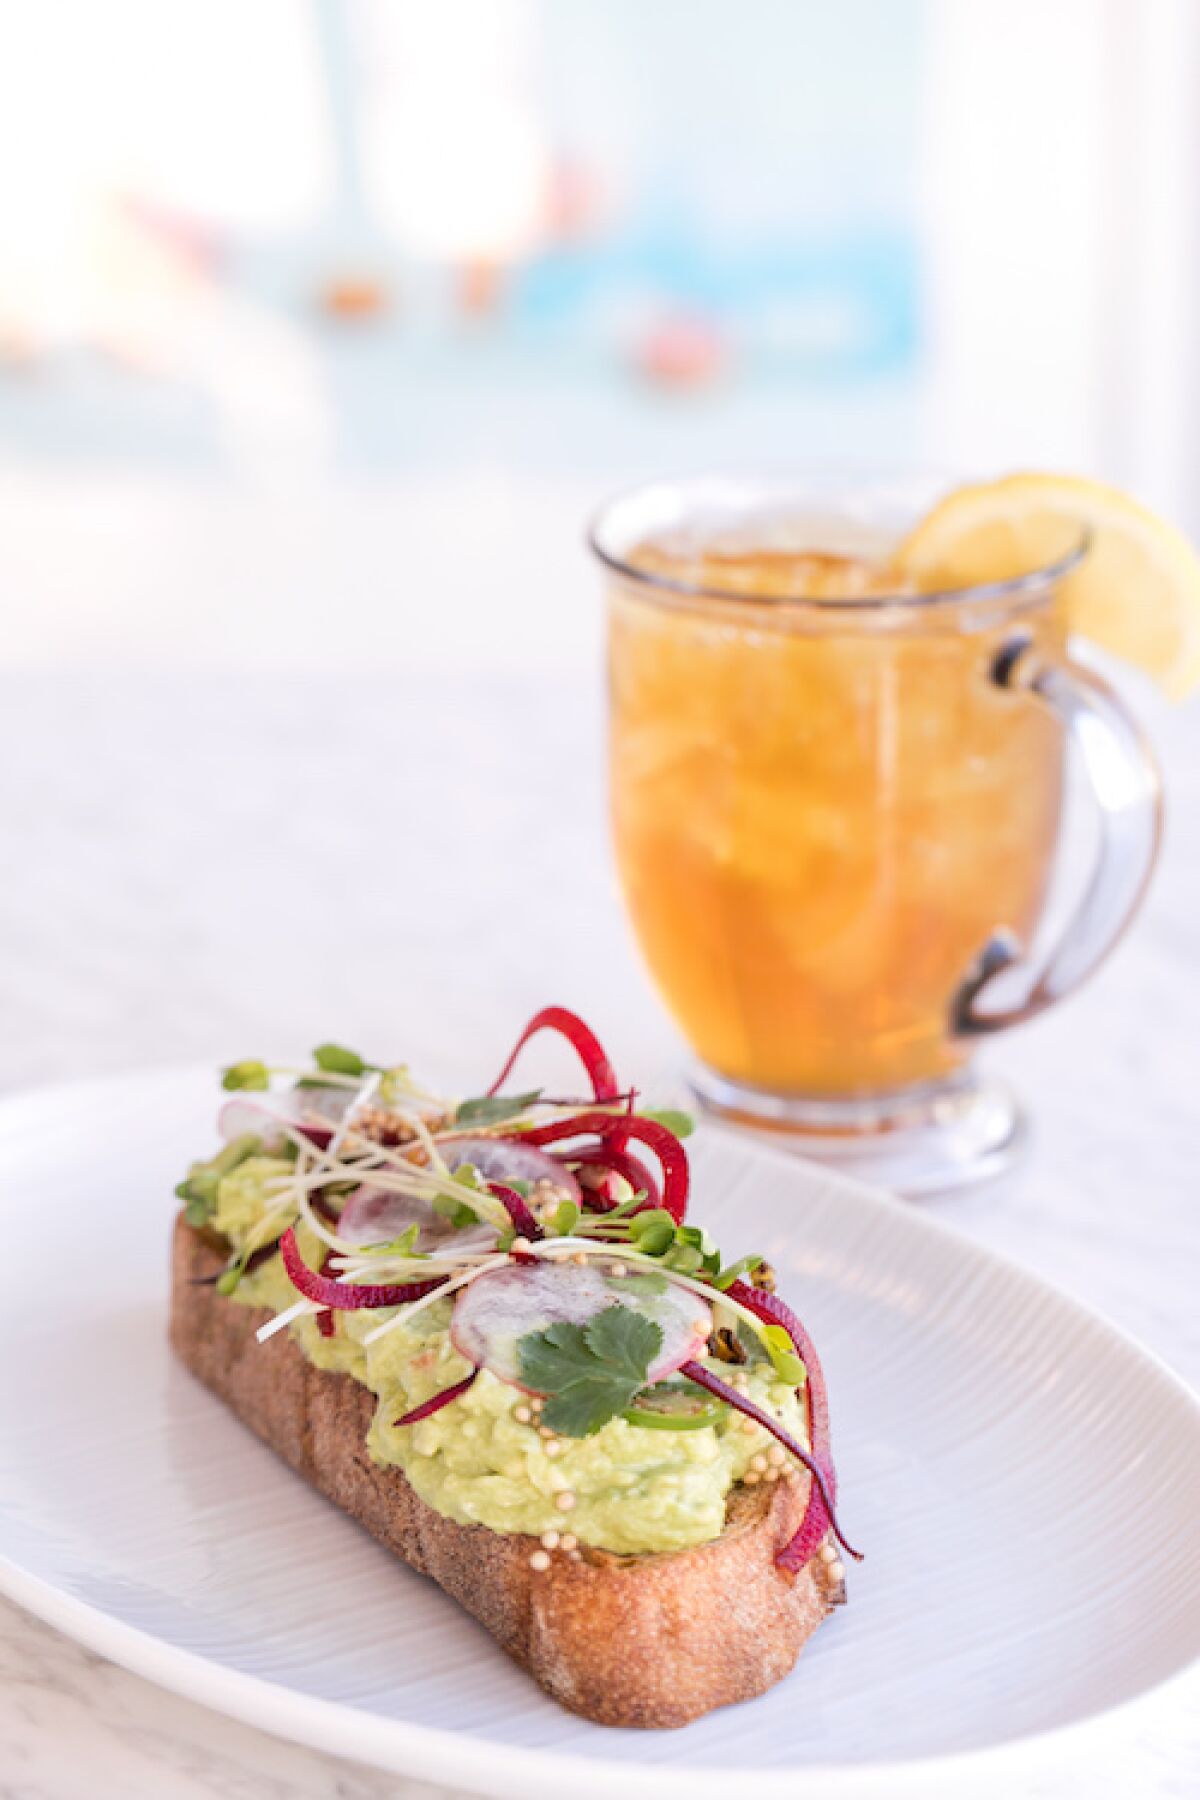 Avocado toast and tea at Parakeet Cafe, which will open in Carlsbad this spring.